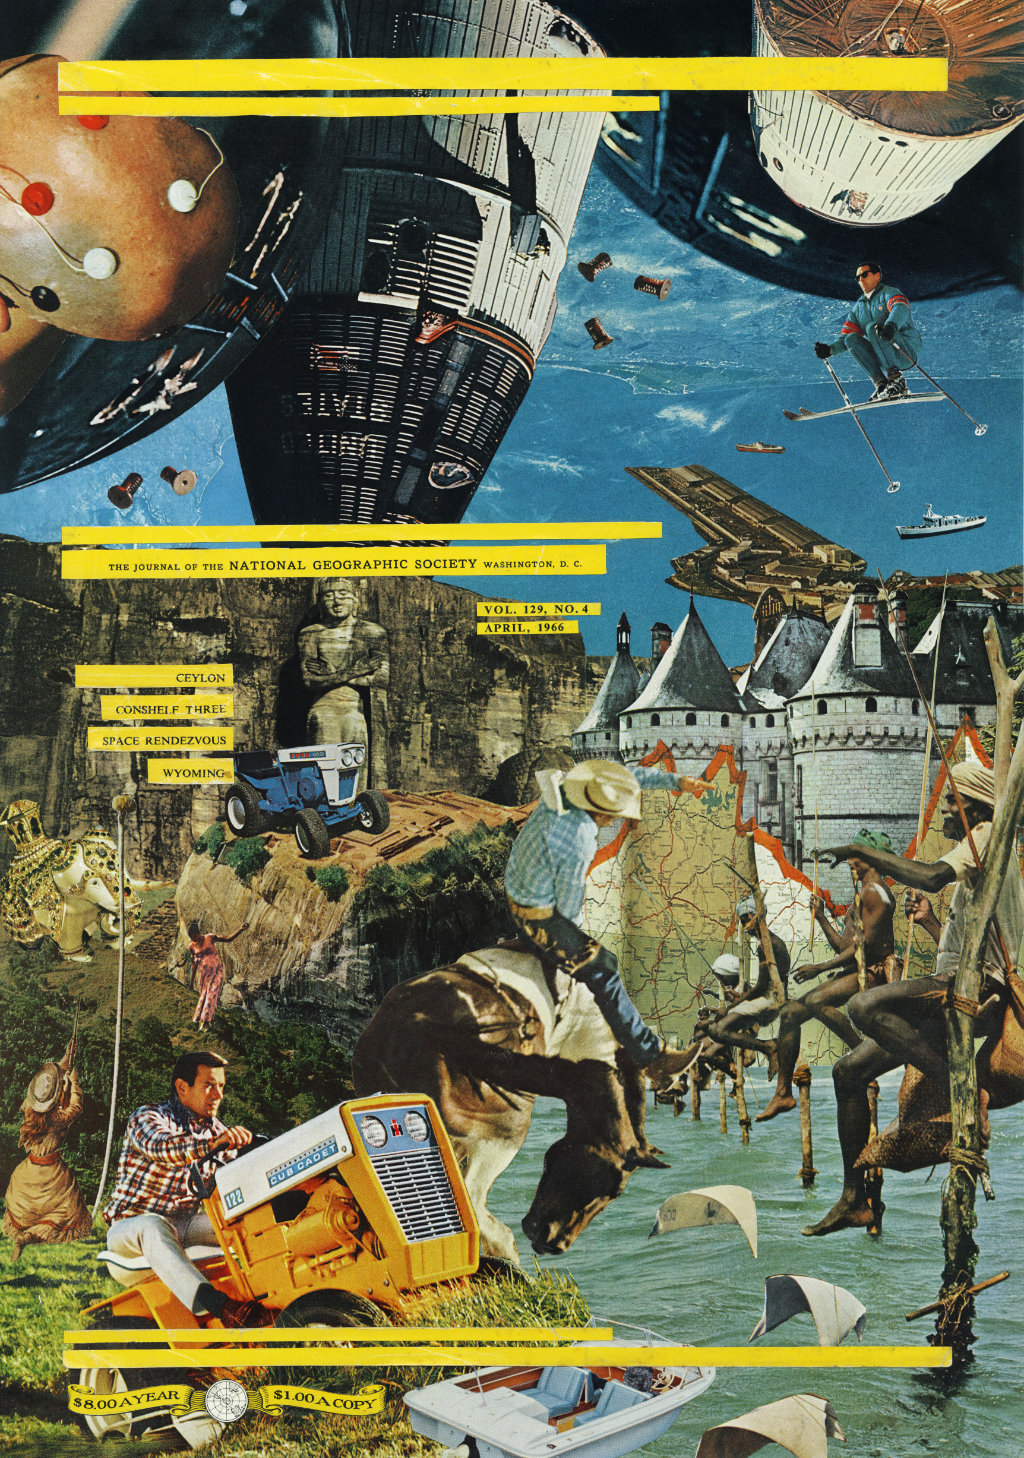 NGS001, 2007 297x420mm Cut & Paste Collage